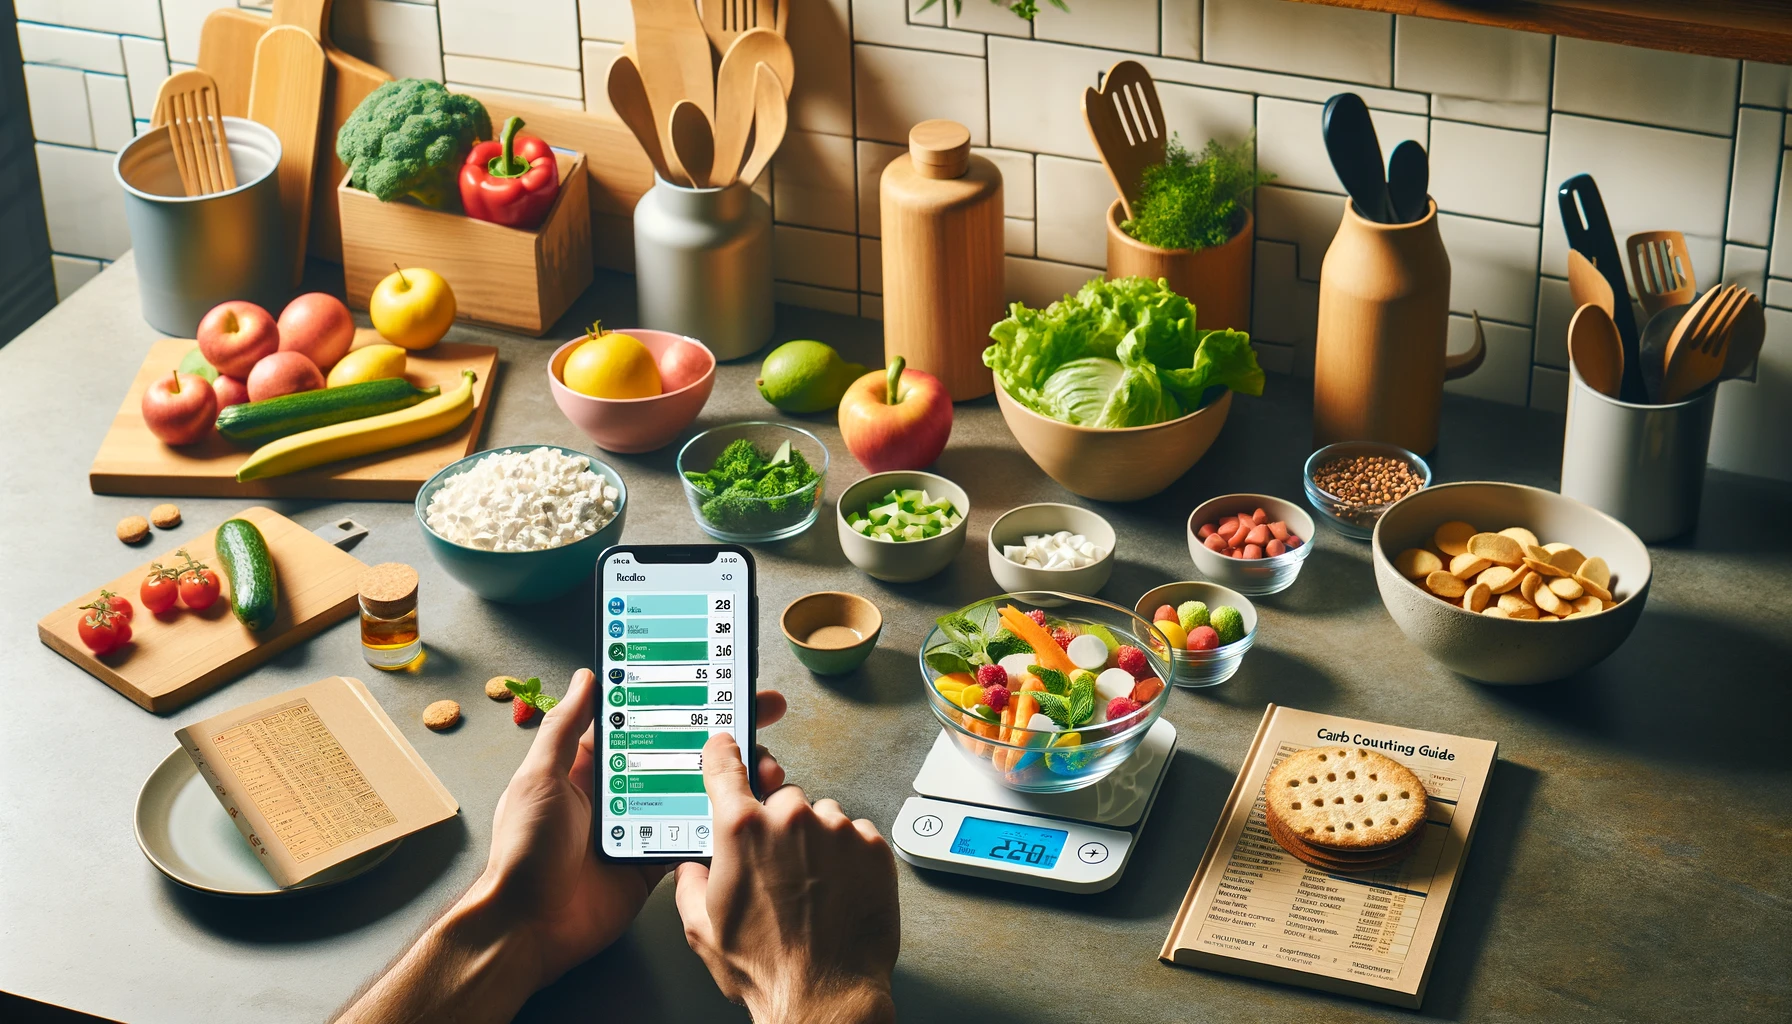 A neatly arranged kitchen countertop displaying a variety of foods with nutritional labels, hands using a smartphone for scanning labels, and a digital scale showing food weight, all suggesting a tech-savvy approach to diabetes control through carb counting.